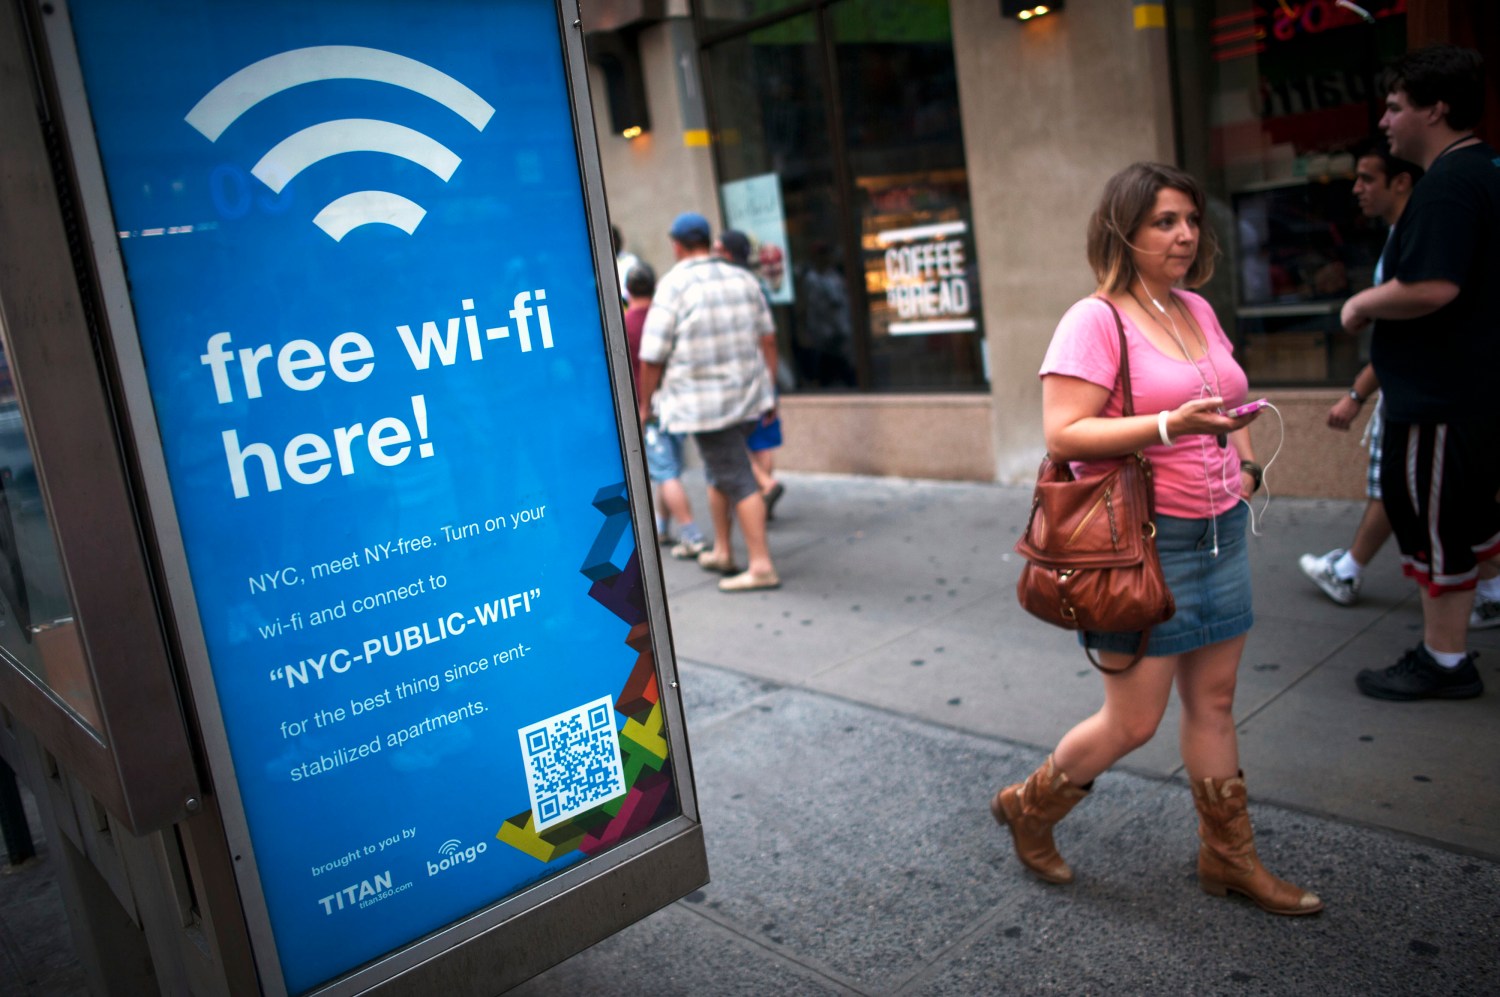 A woman walks past a WiFi-enabled phone booth in New York July 12, 2012. The New York City Department of Information Technology and Telecommunications have announced that they have converted 10 public pay phones into free WiFi hot spots as part of a pilot program to determine if it is possible to expand all city pay phones into a city-wide WiFi network. REUTERS/Keith Bedford (UNITED STATES - Tags: BUSINESS SOCIETY SCIENCE TECHNOLOGY TELECOMS) - GM1E87D0LF001